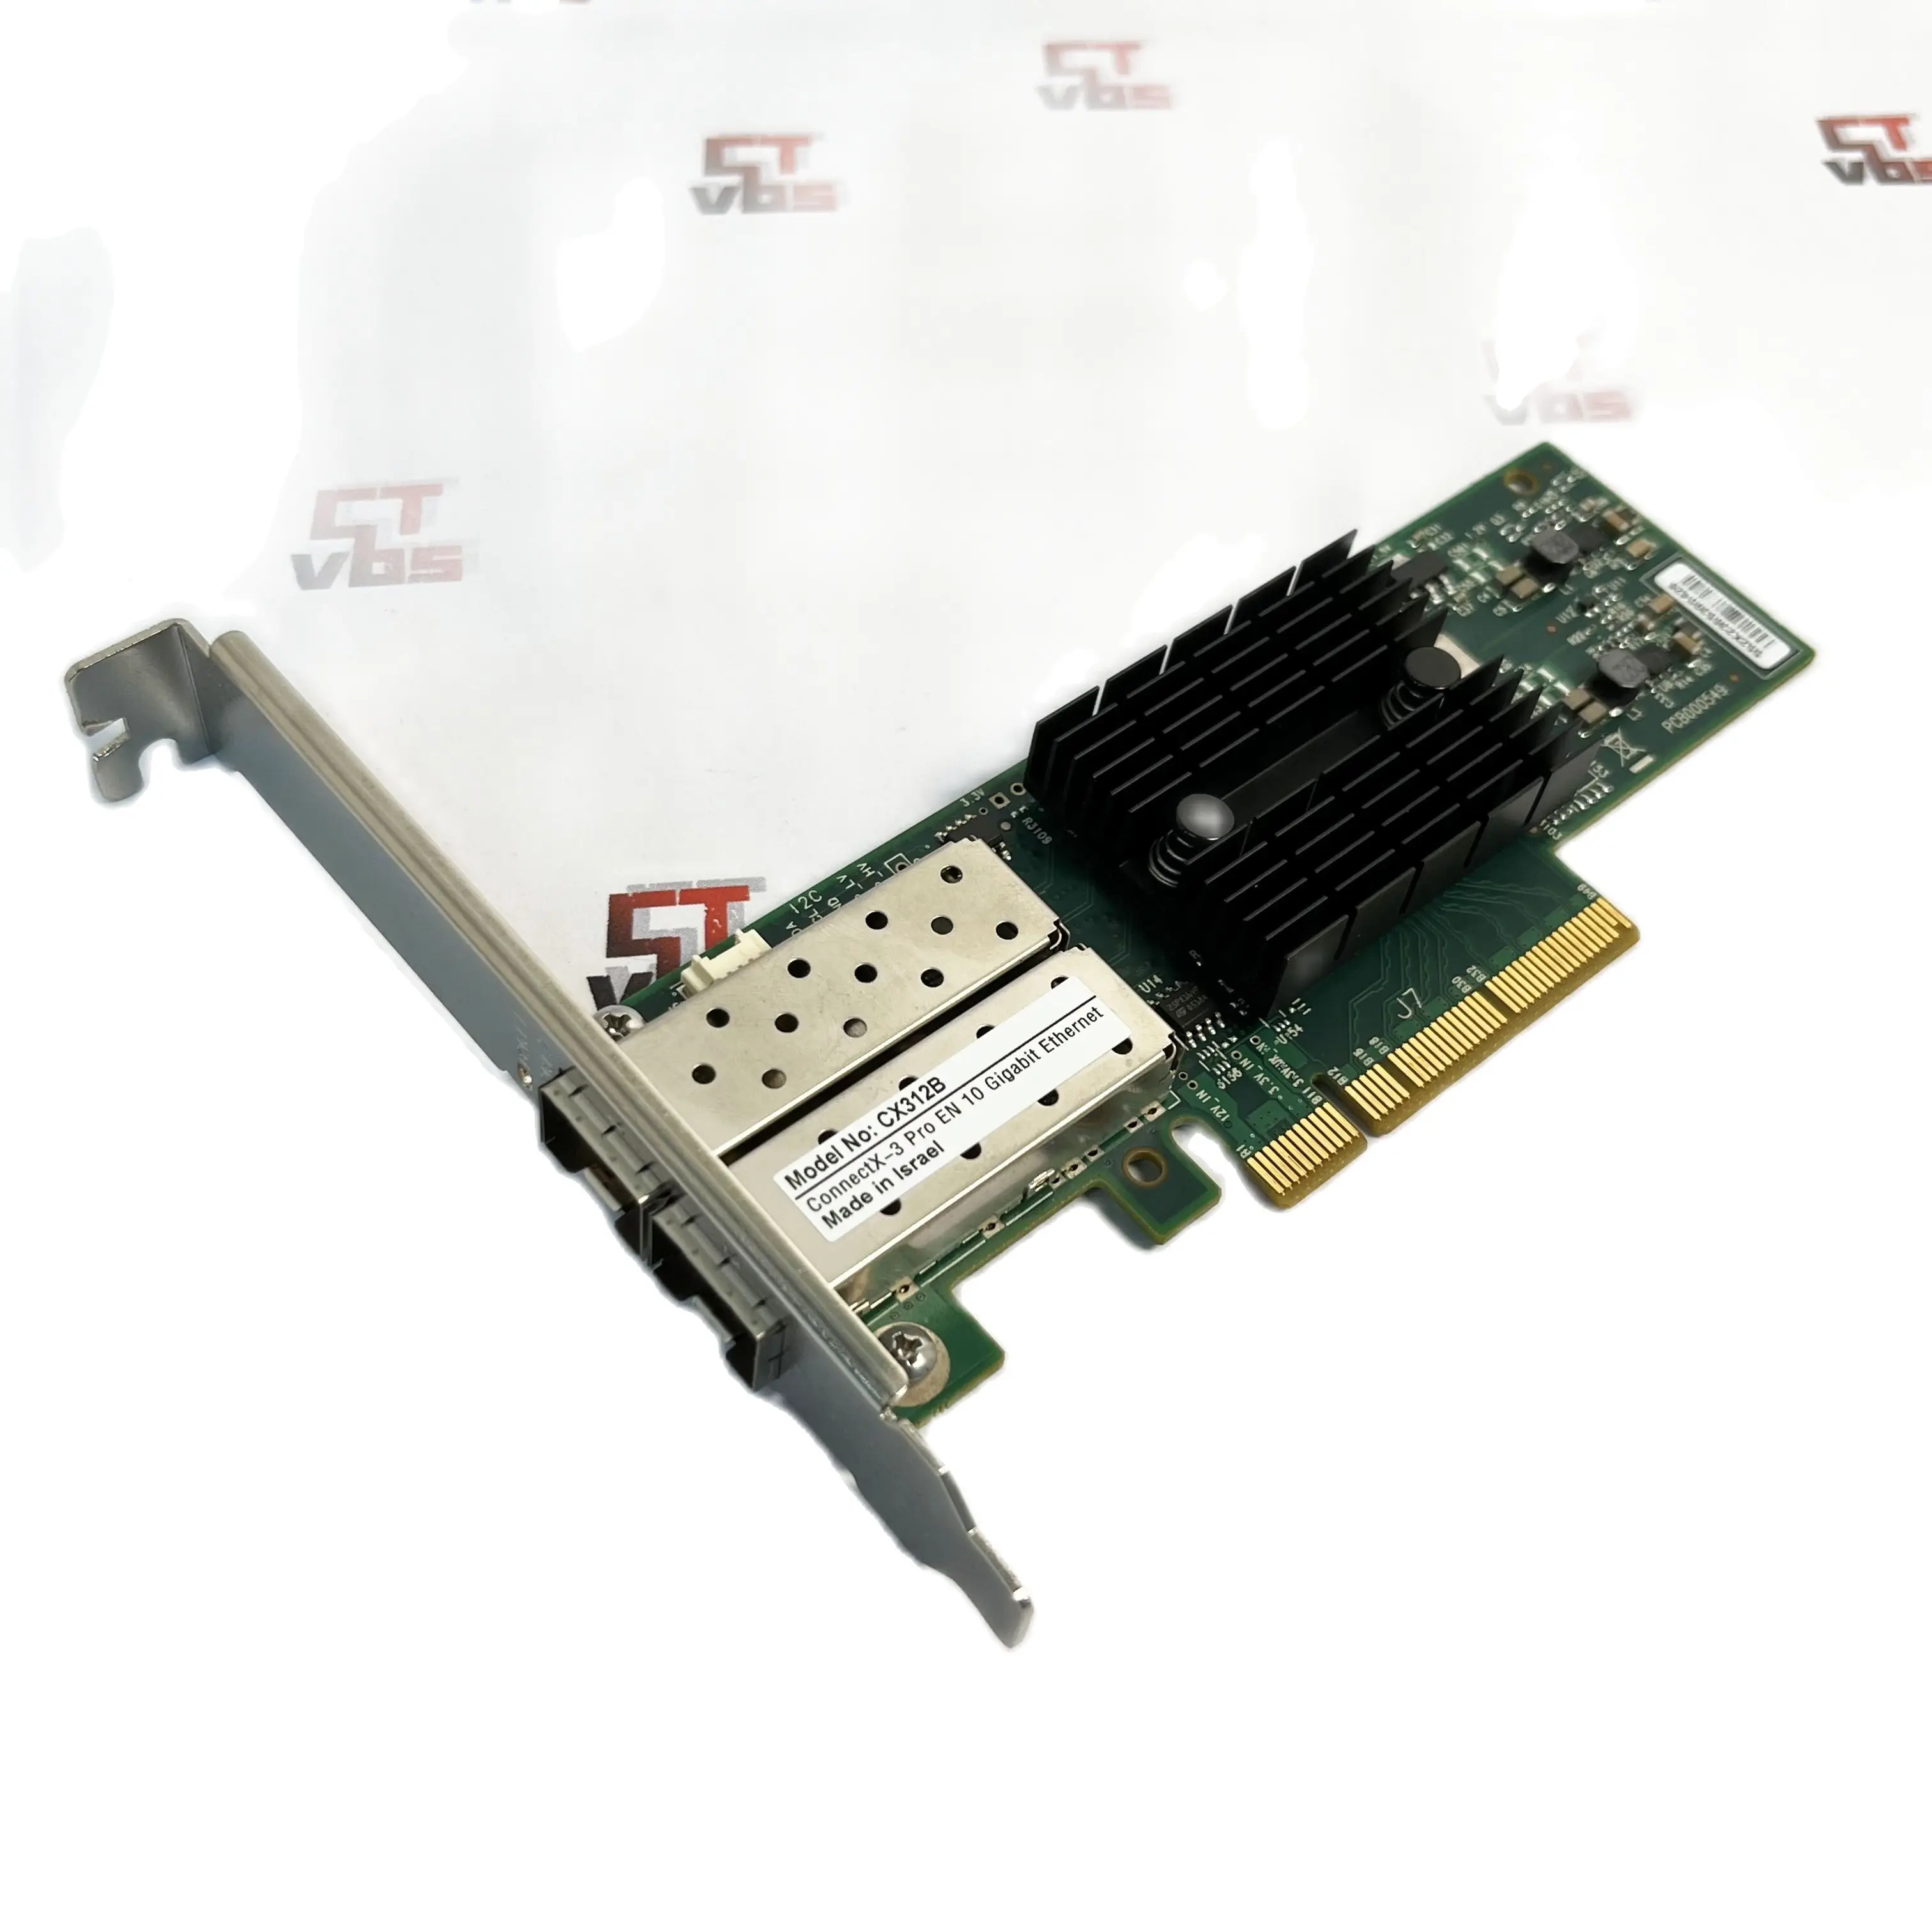 Mellanox ConnectX-3 Pro CX312B 10Gbe CX312B-XCCT SFP+ Dual Port Ethernet Adapter Networking Card 10g double port ethernet card 10g x540 t2 pcie x8 nework extend adapter